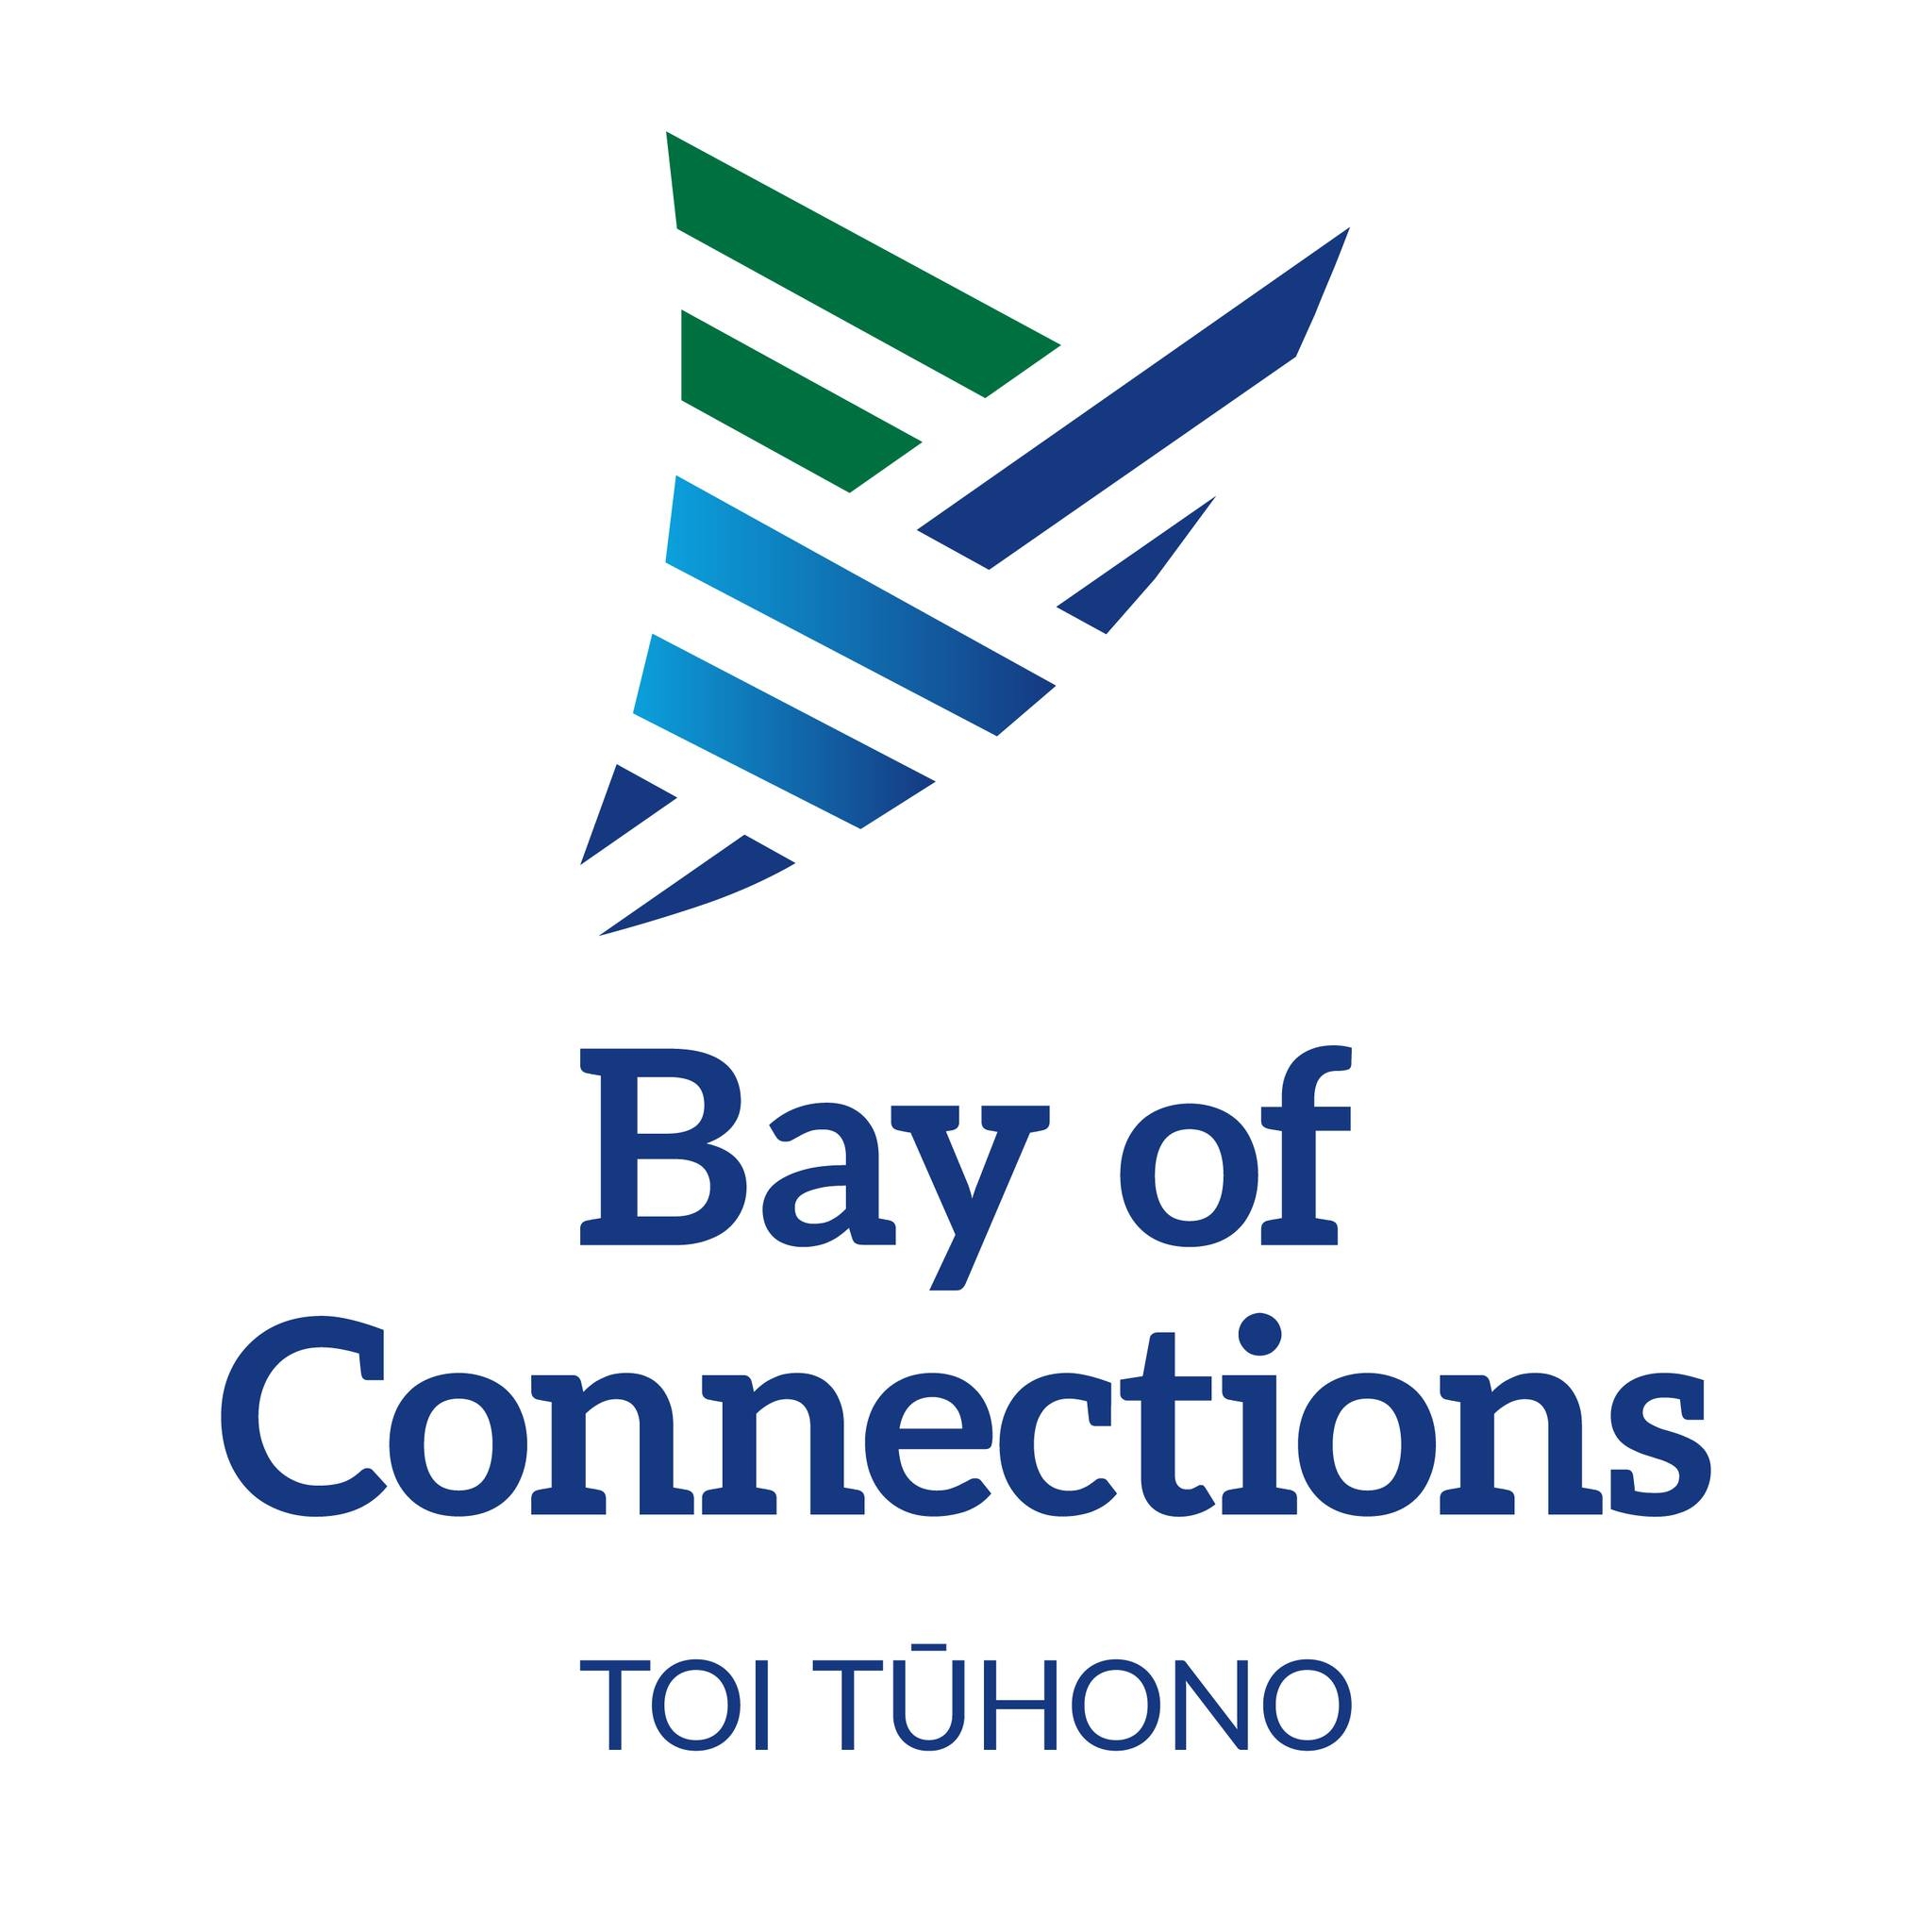 Bay of Connections